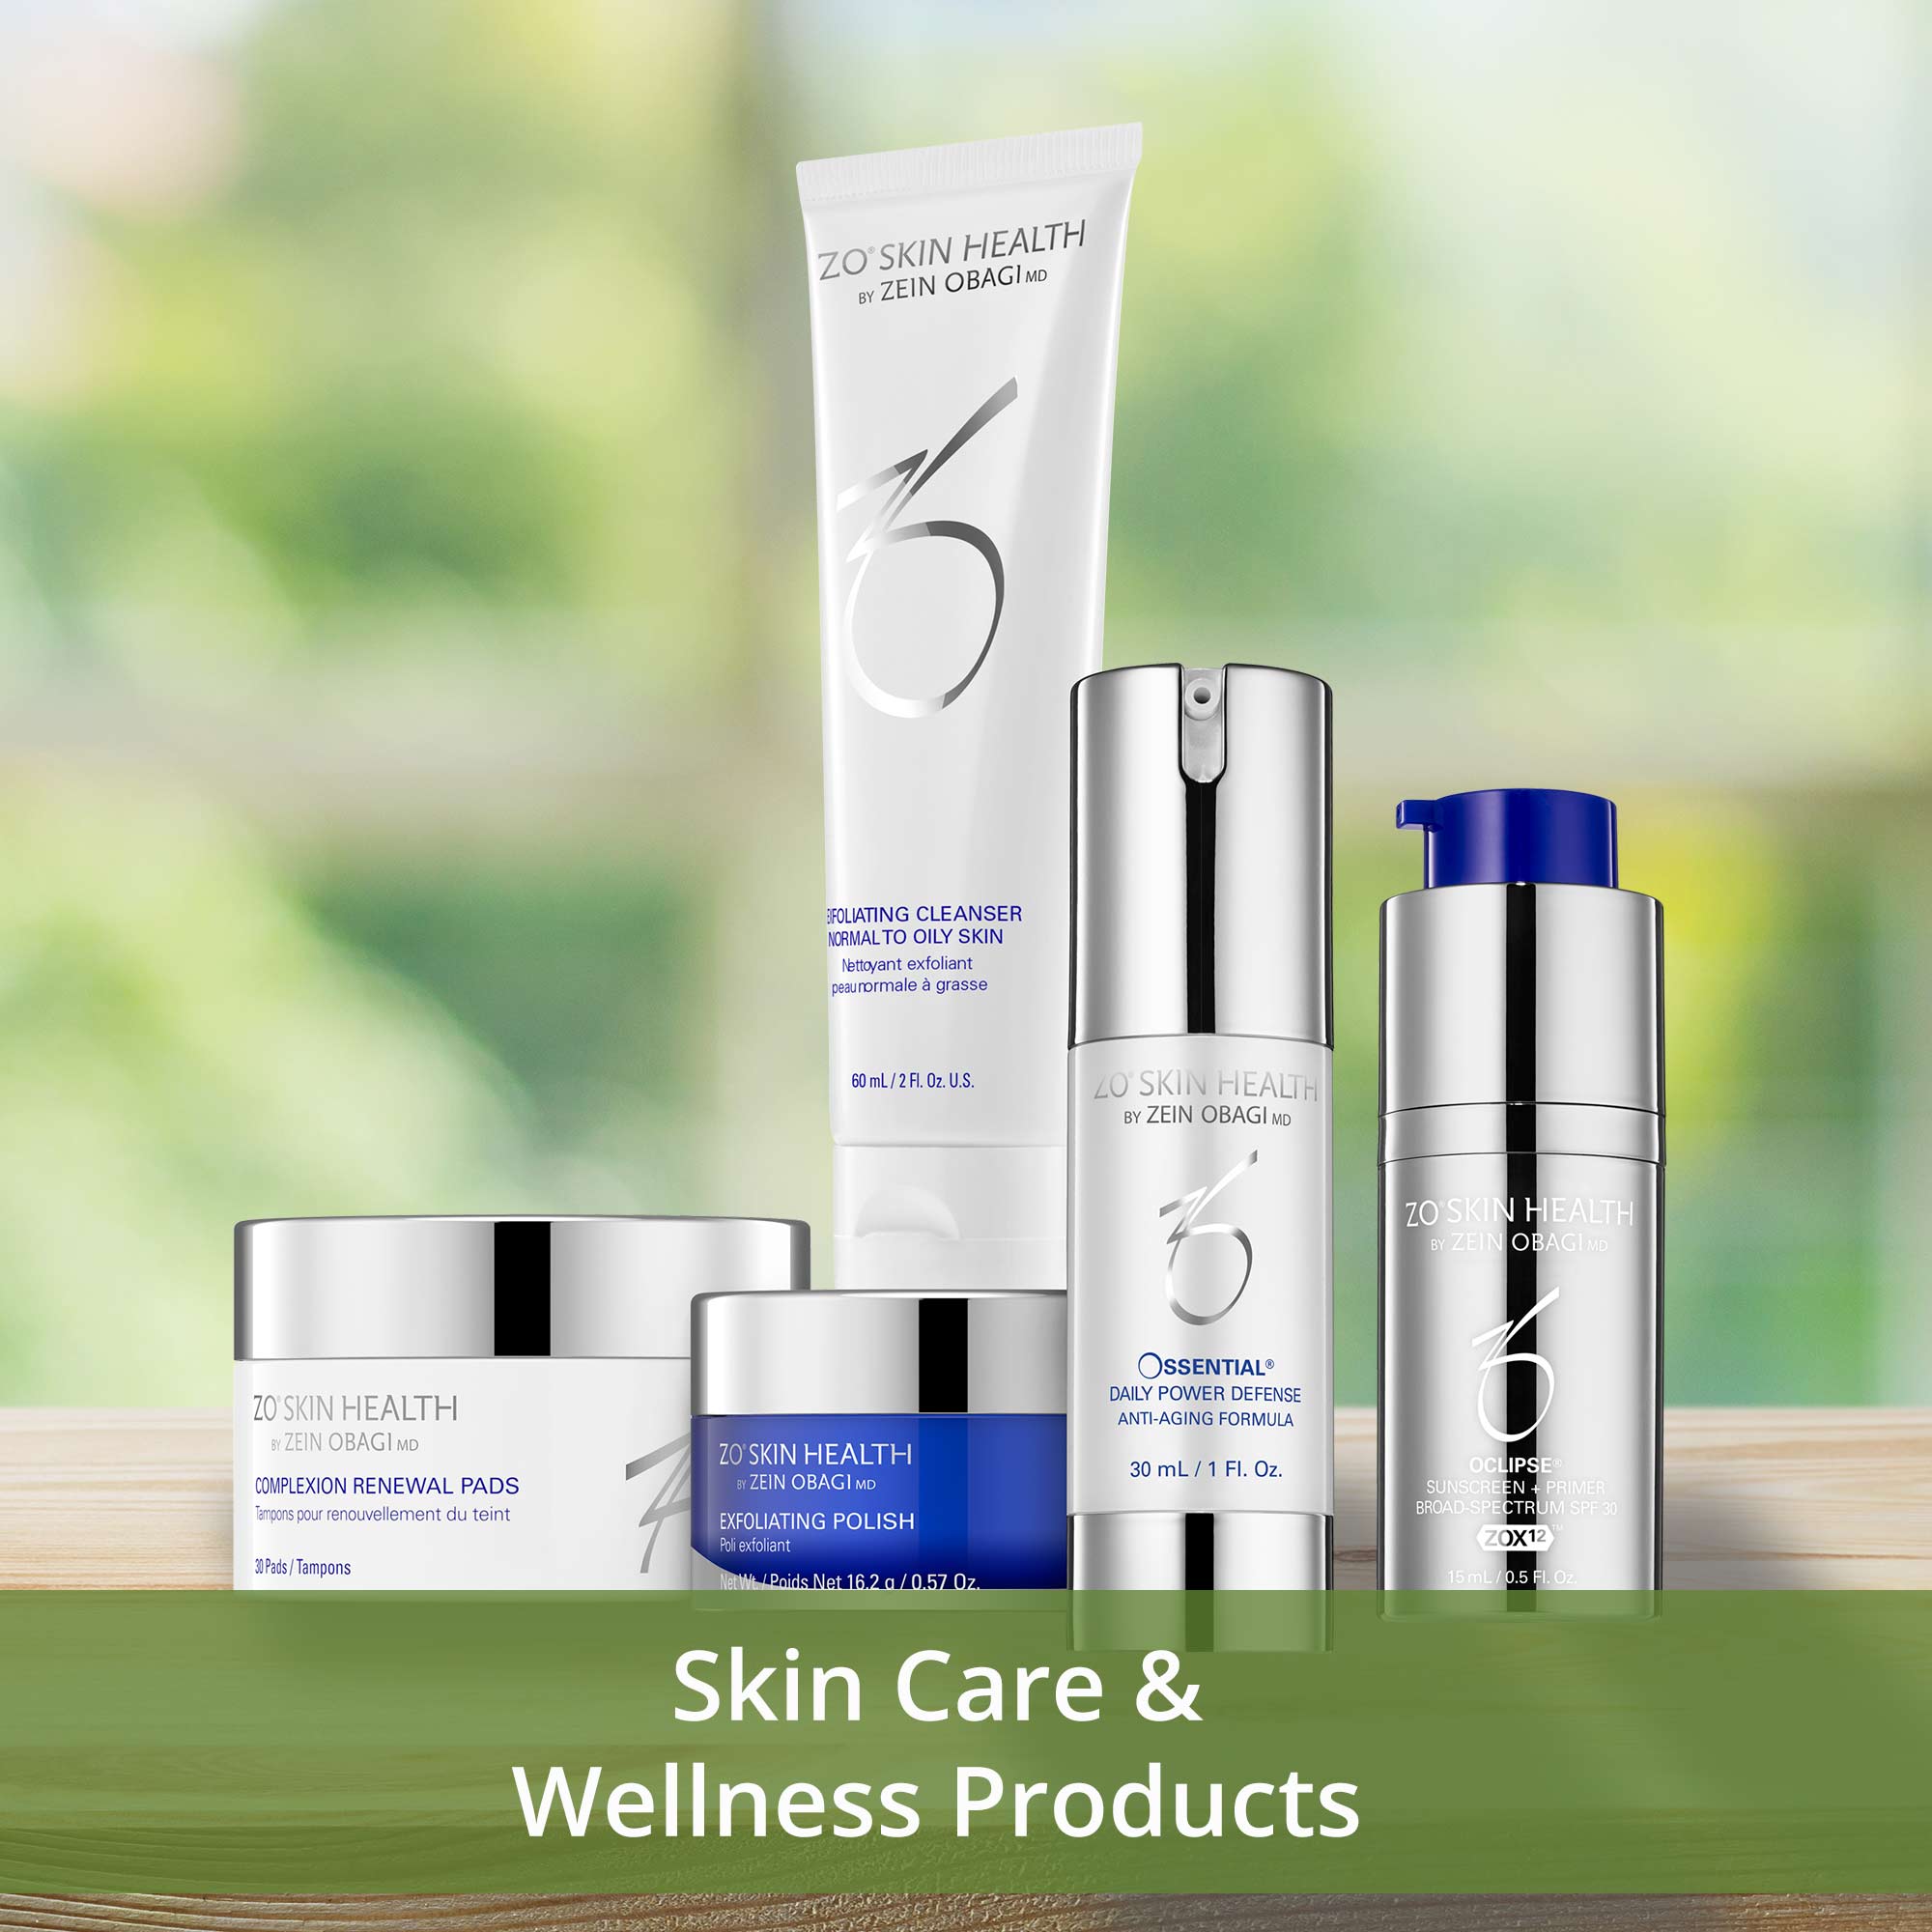 Skin Care & Wellness Products (Copy)